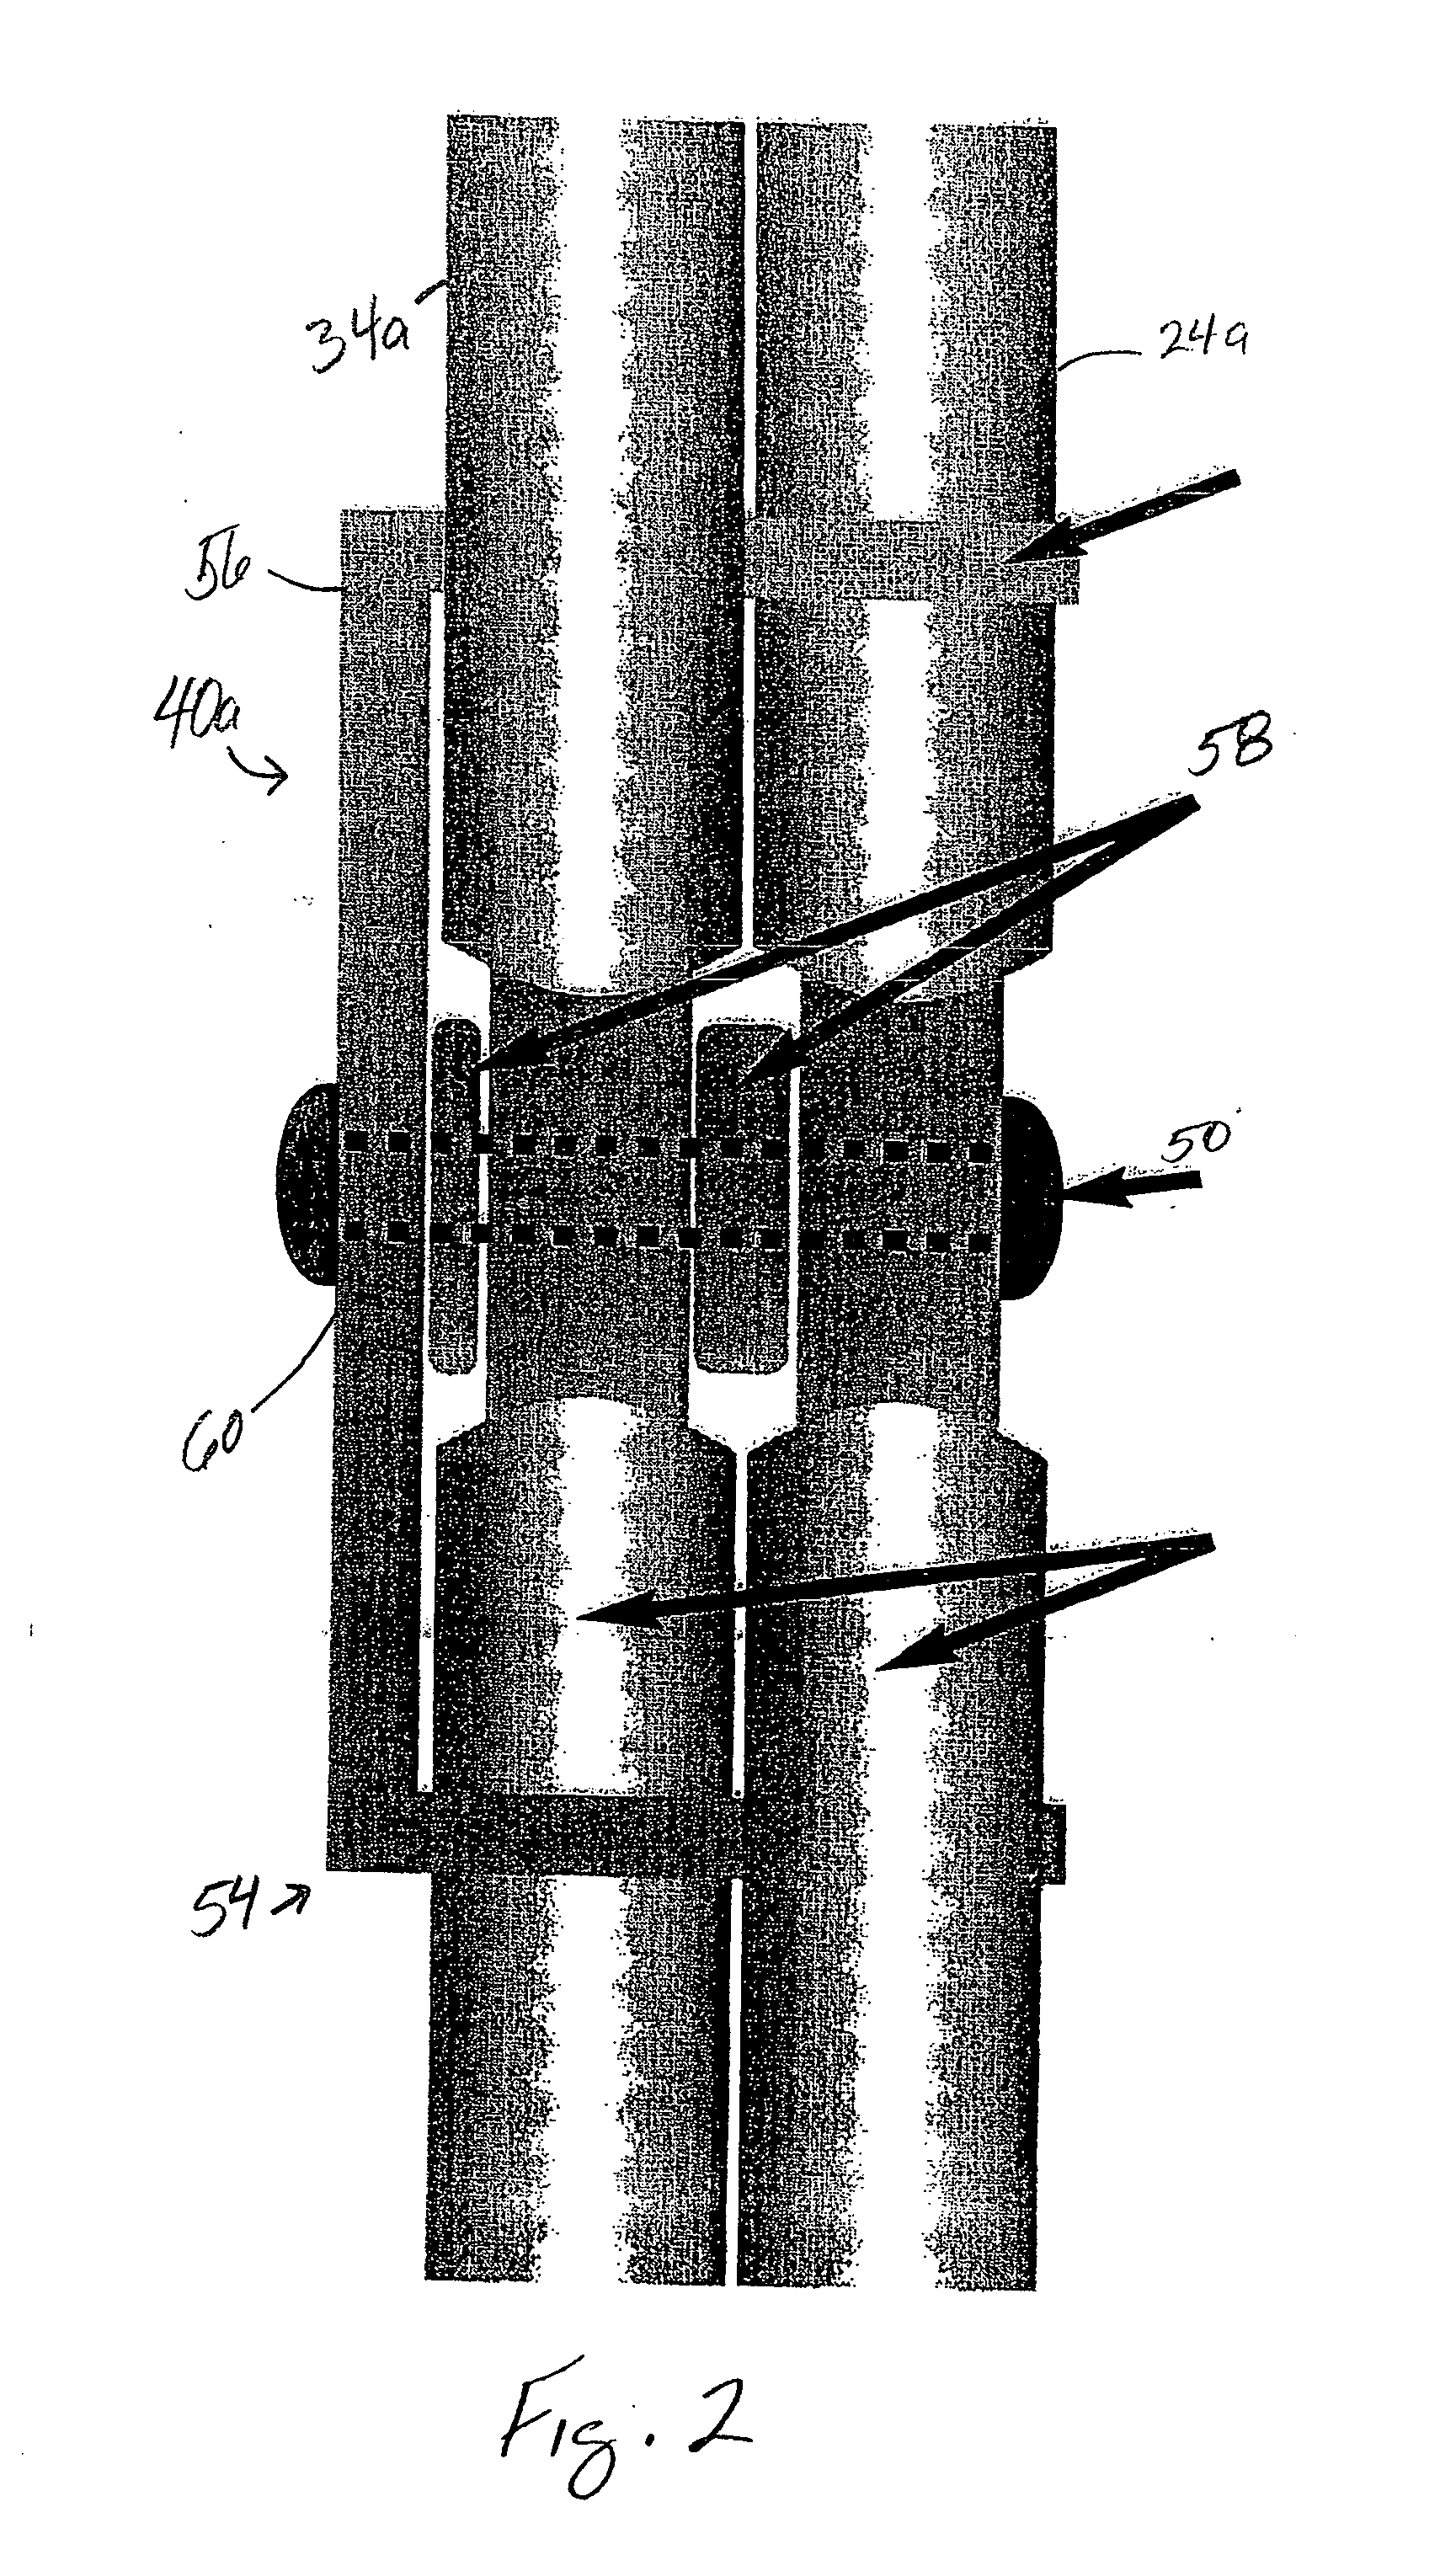 System and method for stabilizing a refrigerator storage bag to facilitate loading the bag with contents